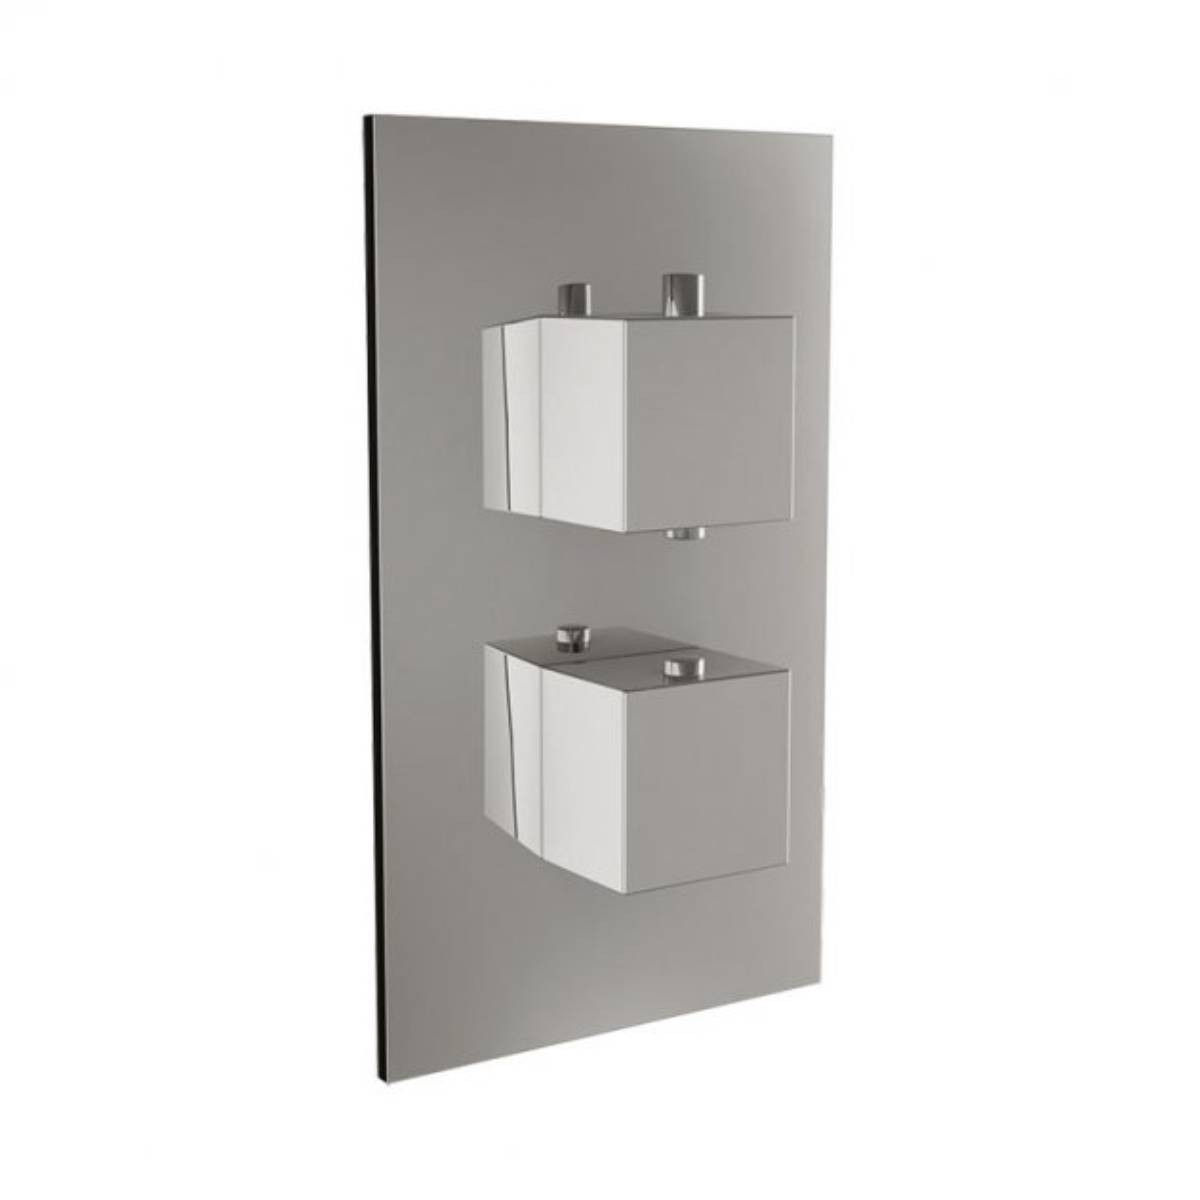 Twin Thermostatic Square Handle Concealed Valve with Diverter (6536)